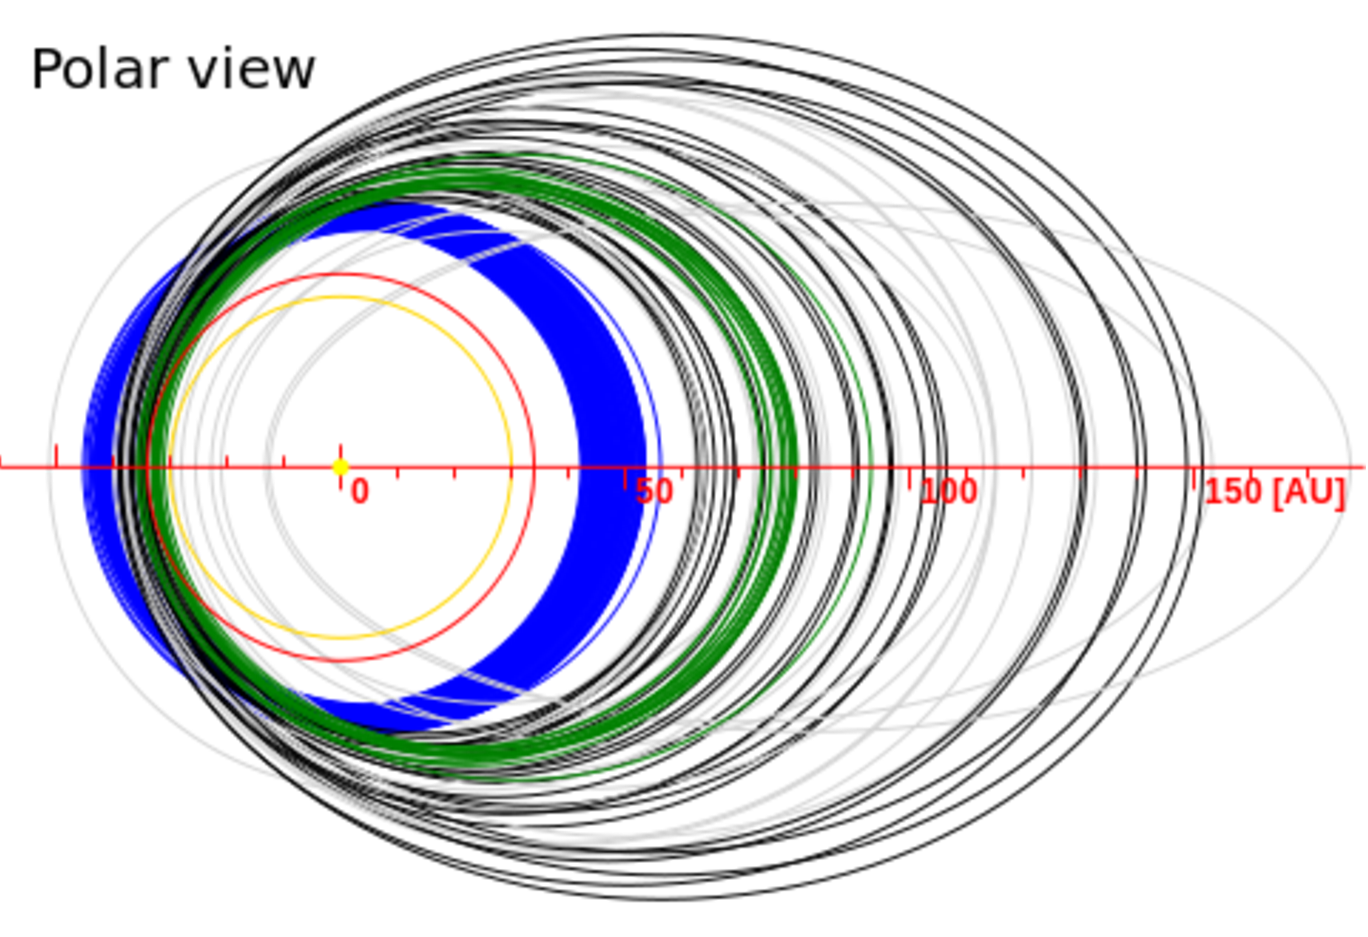 Illustration of the orbits of outer-solar system bodies (with the perihelia co-located on the left for easy comparison). Includes low-eccentricity classical Kuiper belt objects (blue), moderate-eccentricity resonant Kuiper belt objects (green), and high-eccentricity, high-perihelia scattered objects (black). The yellow circle represents Neptune’s orbit. [Created 2006 using the Minor Planet Center Orbit database]